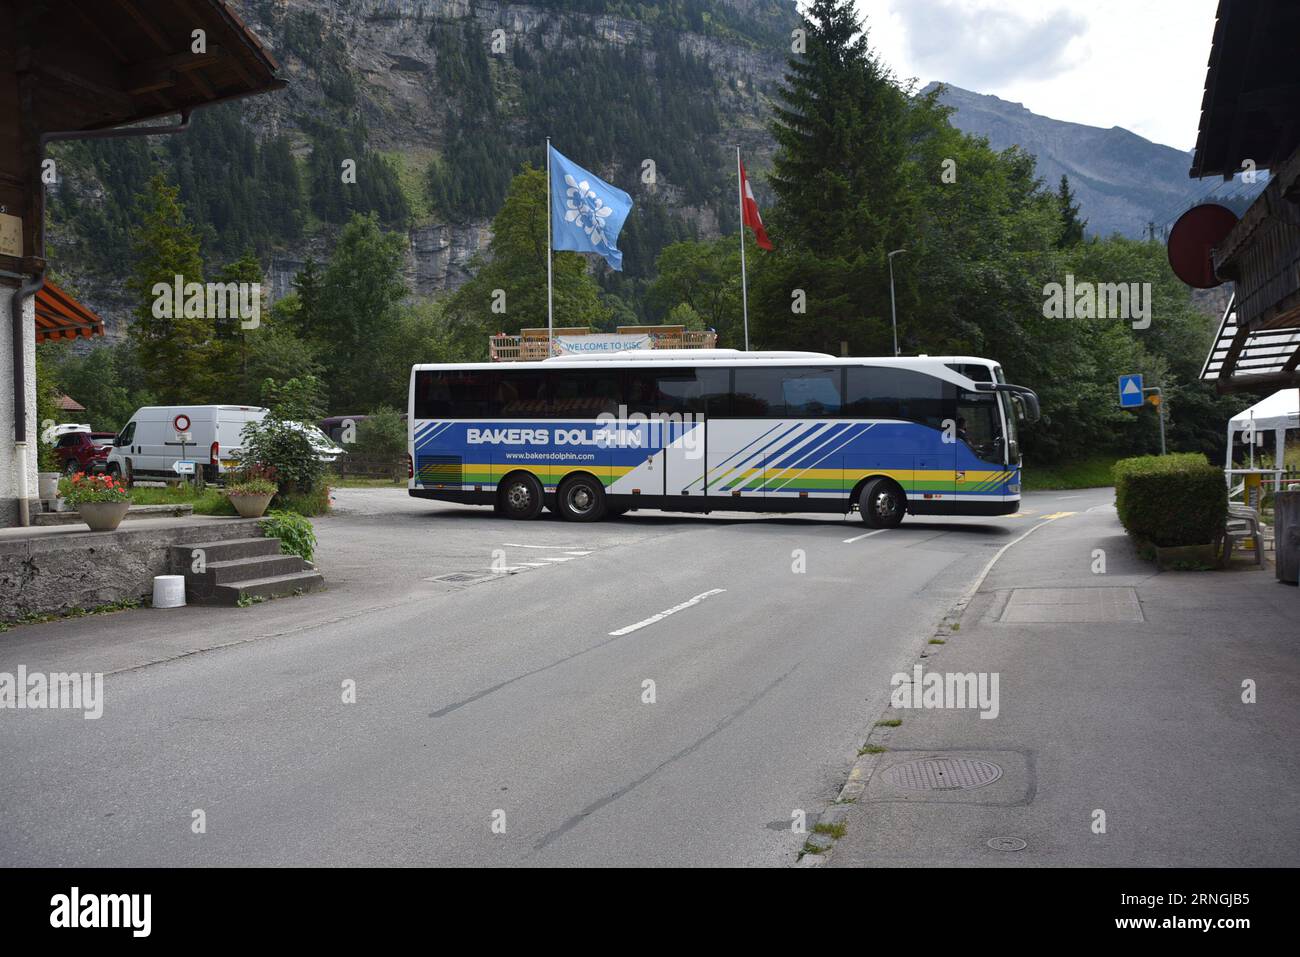 Bakers Dolphin Coach in Switzerland Stock Photo